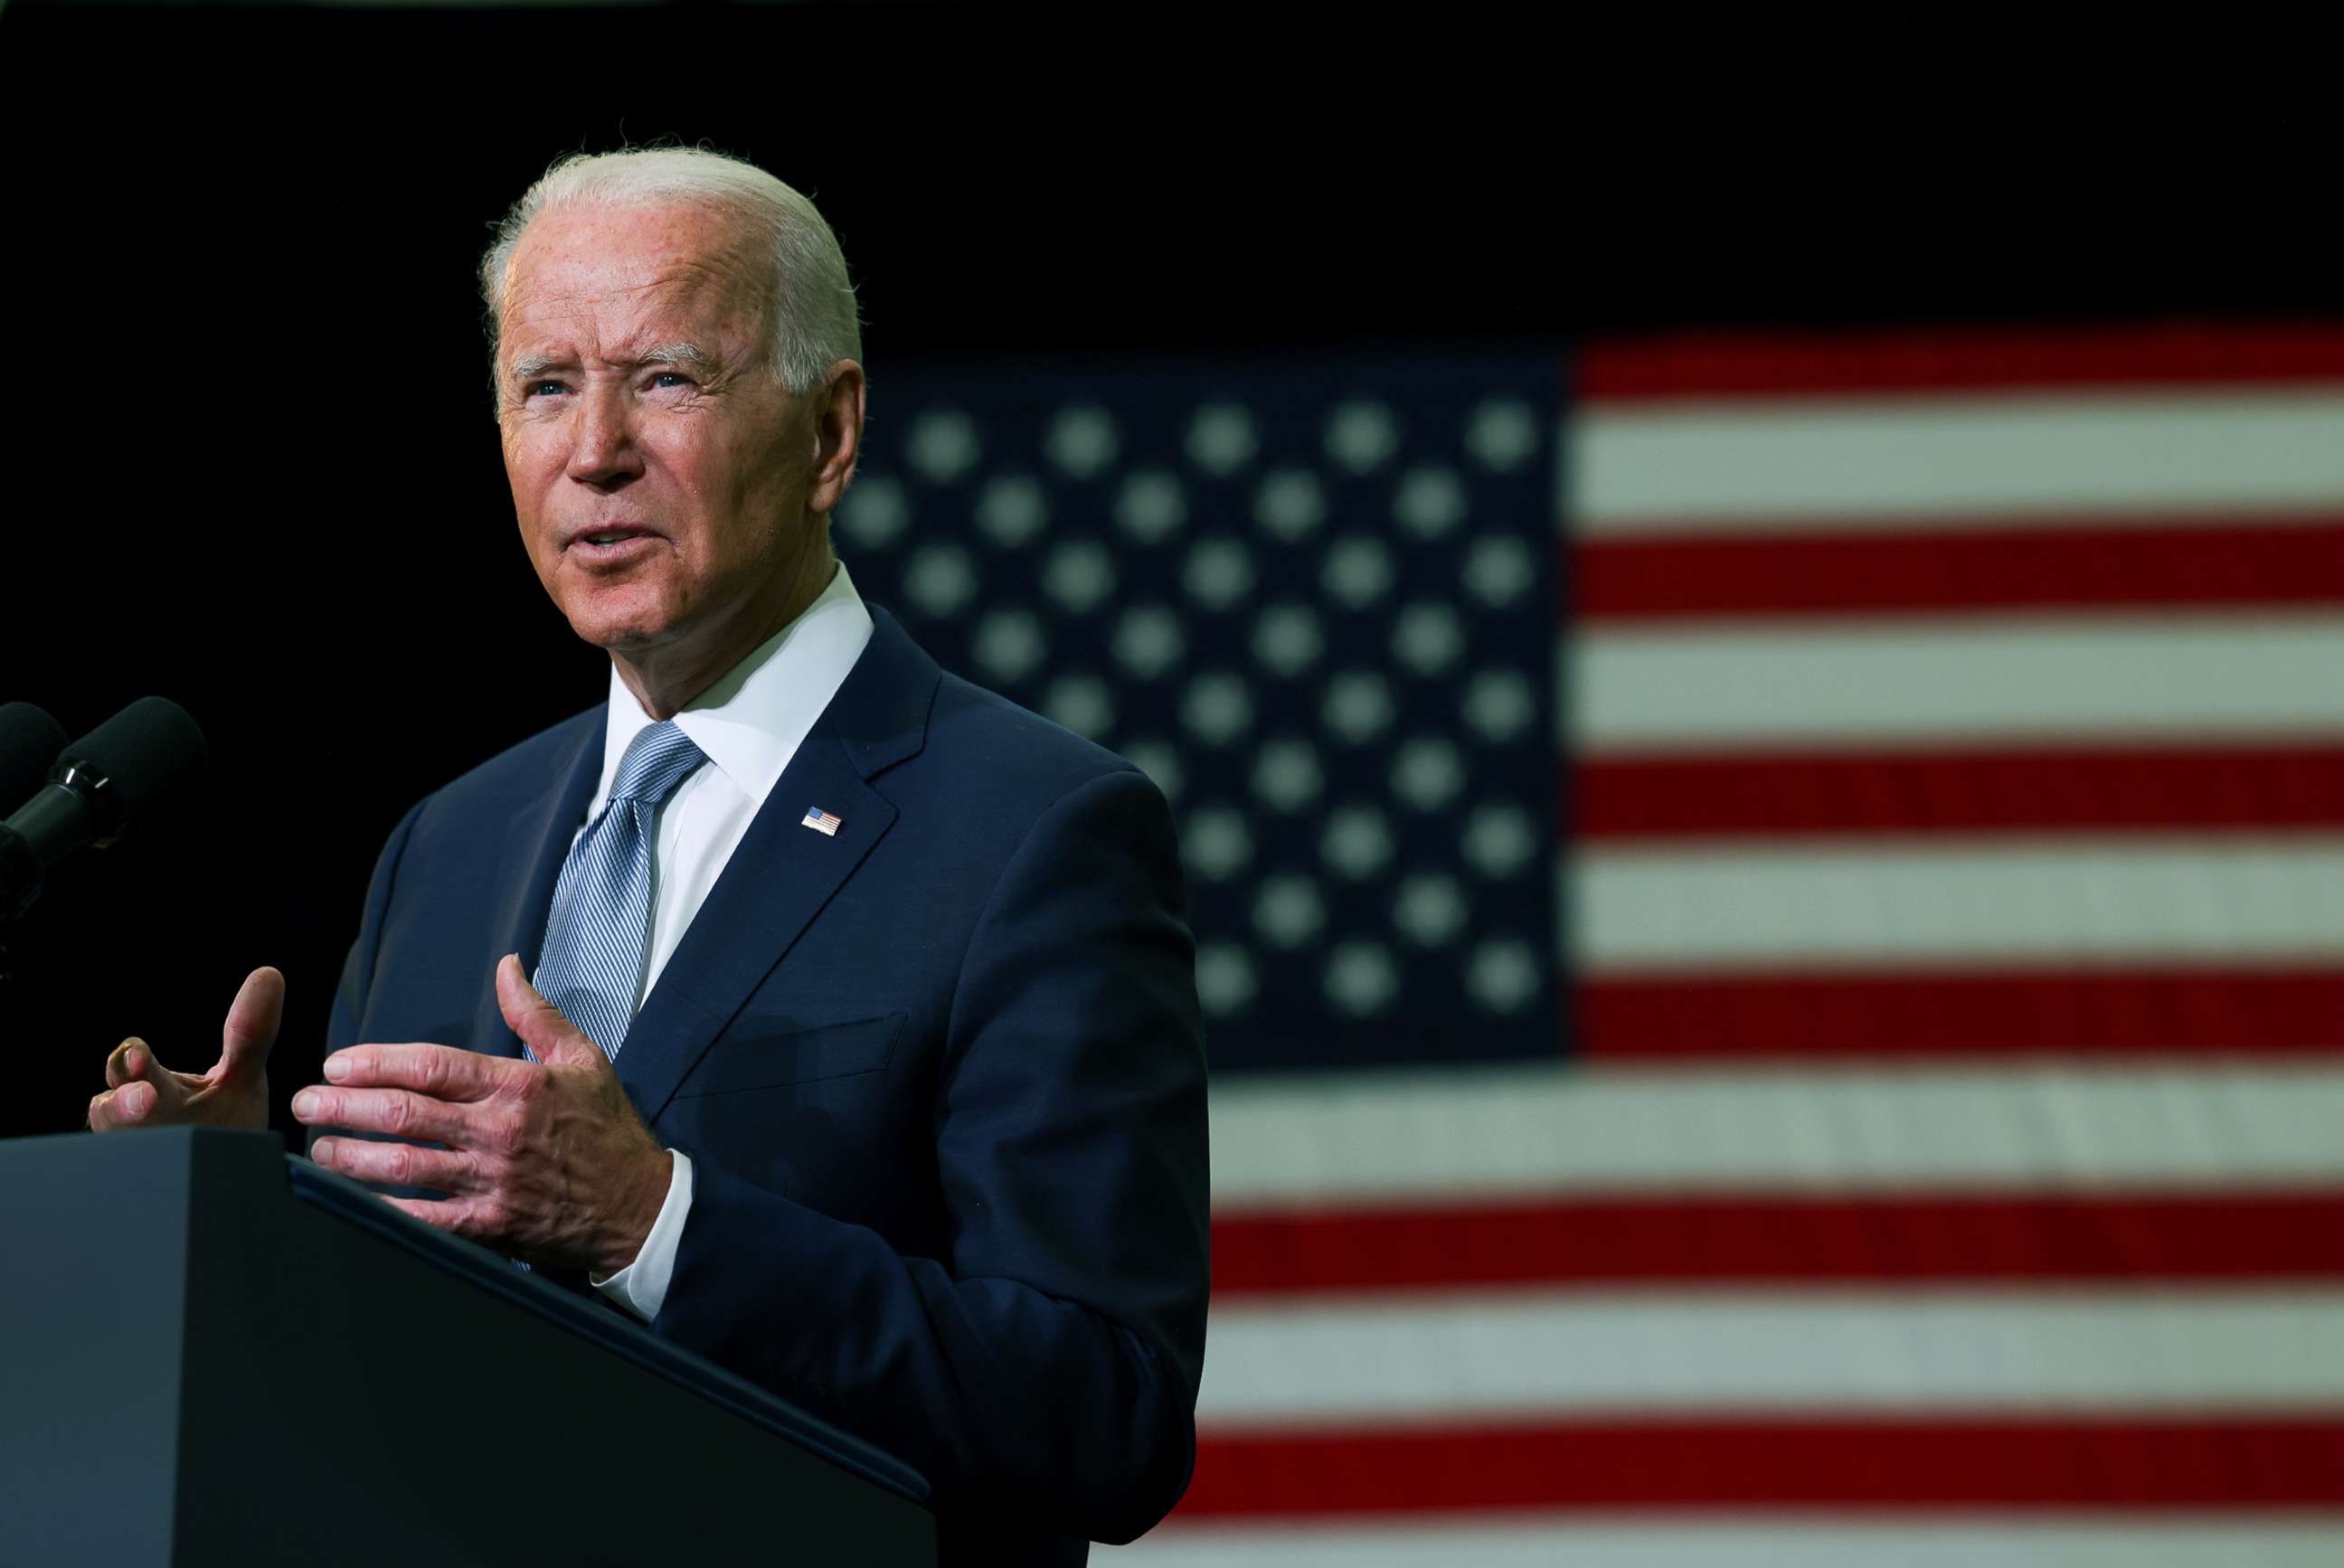 PHOTO: President Joe Biden delivers remarks on his proposed "American Families Plan" legislation at McHenry County College during a visit to the northwest Chicago suburb Crystal Lake, Ill., July 7, 202